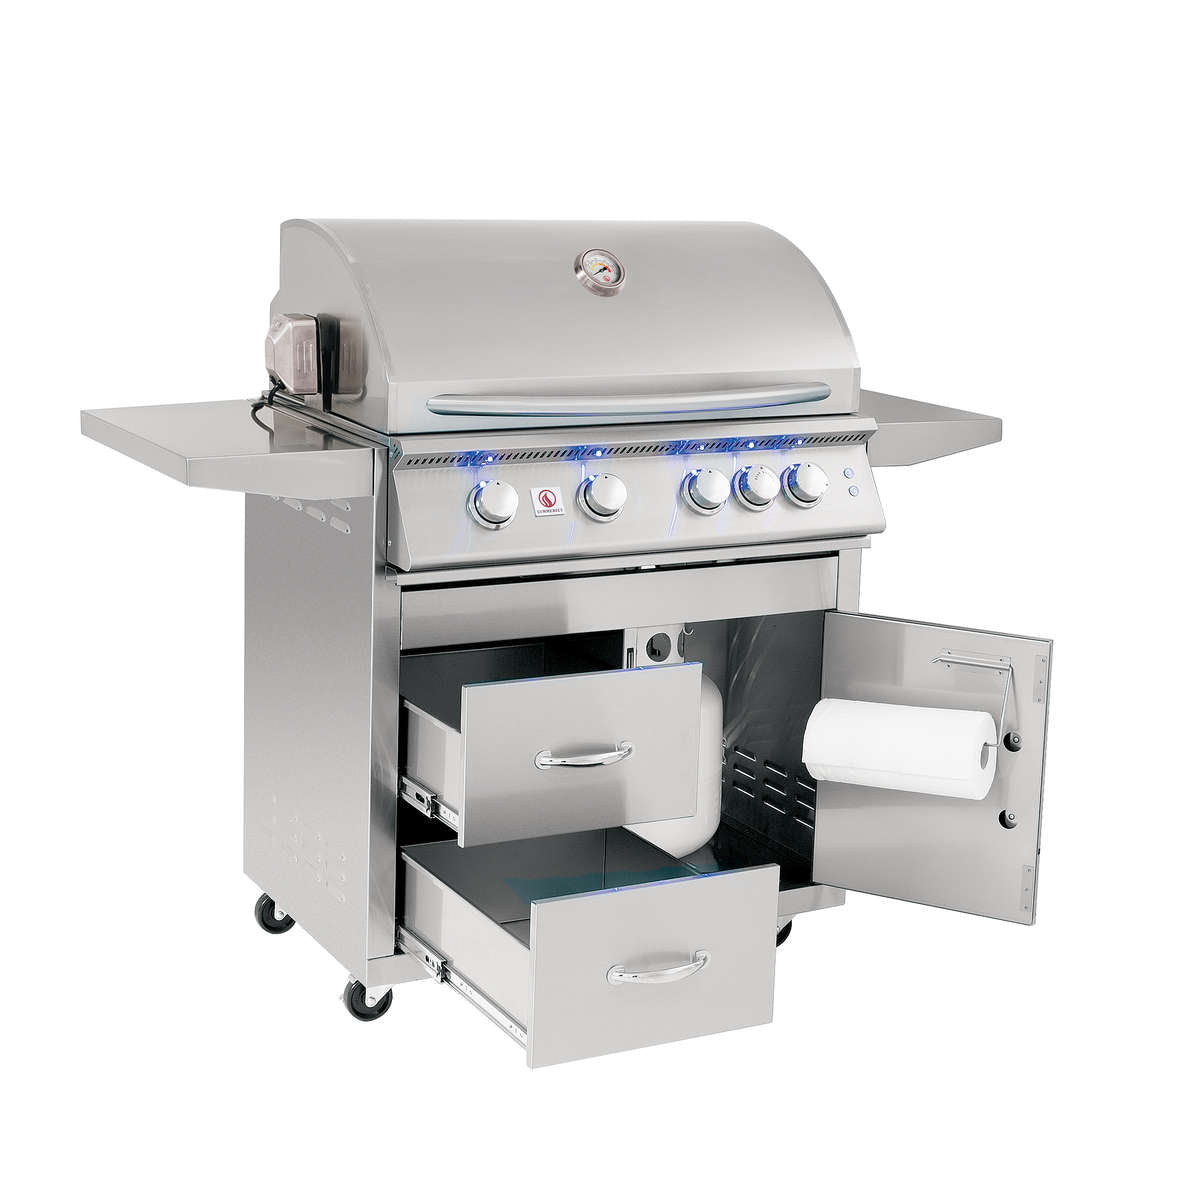 Summerset Sizzler Pro 32 Inch Natural Grill on Cart